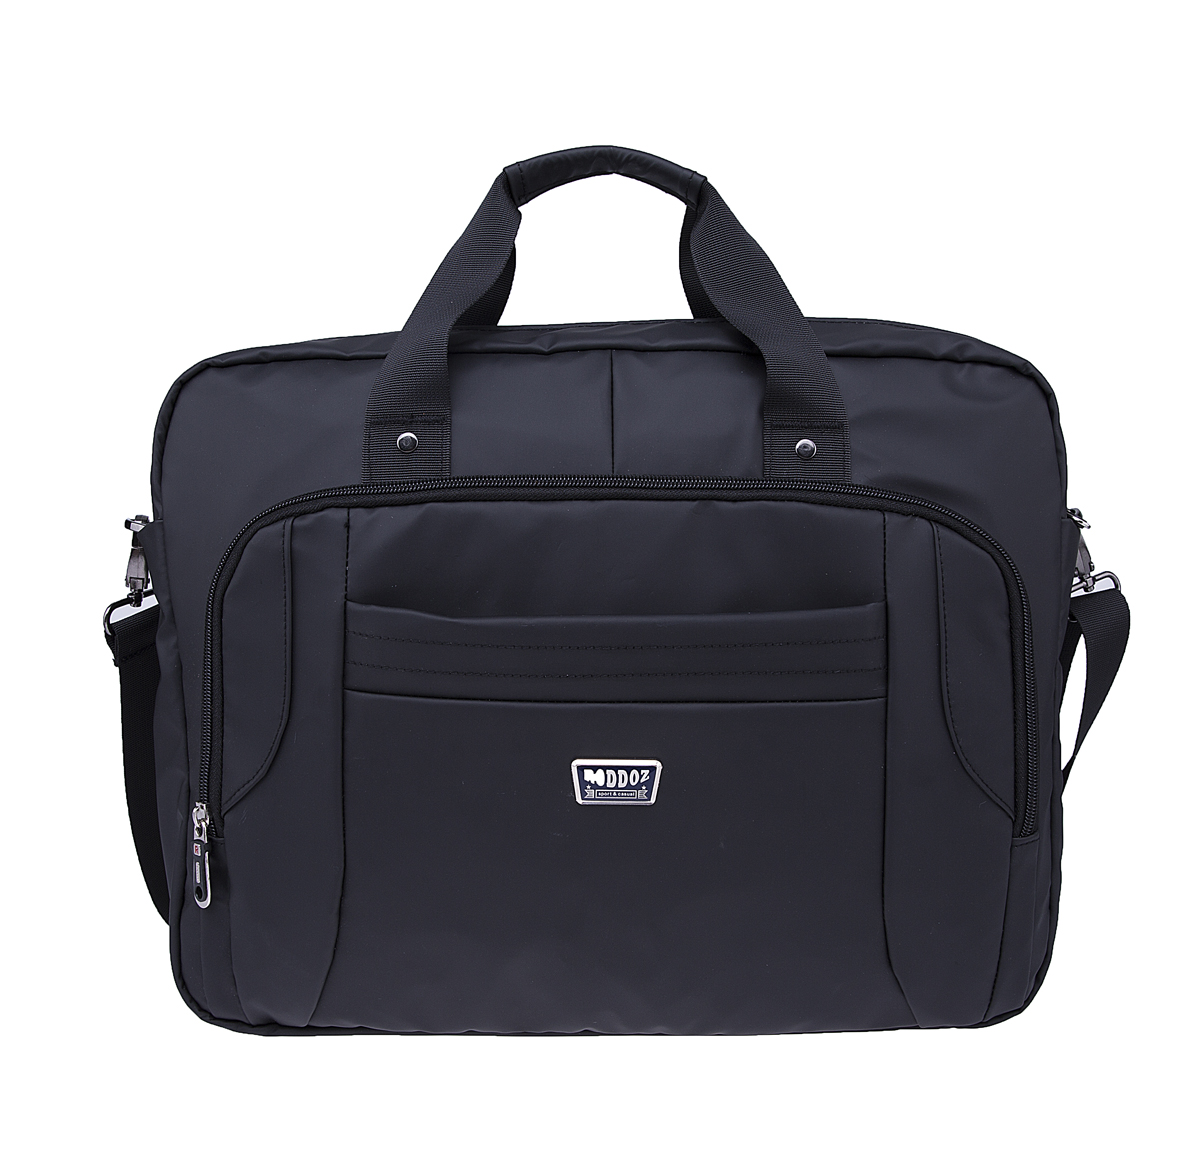 Mens Briefcase Laptop Bags for Business Travel